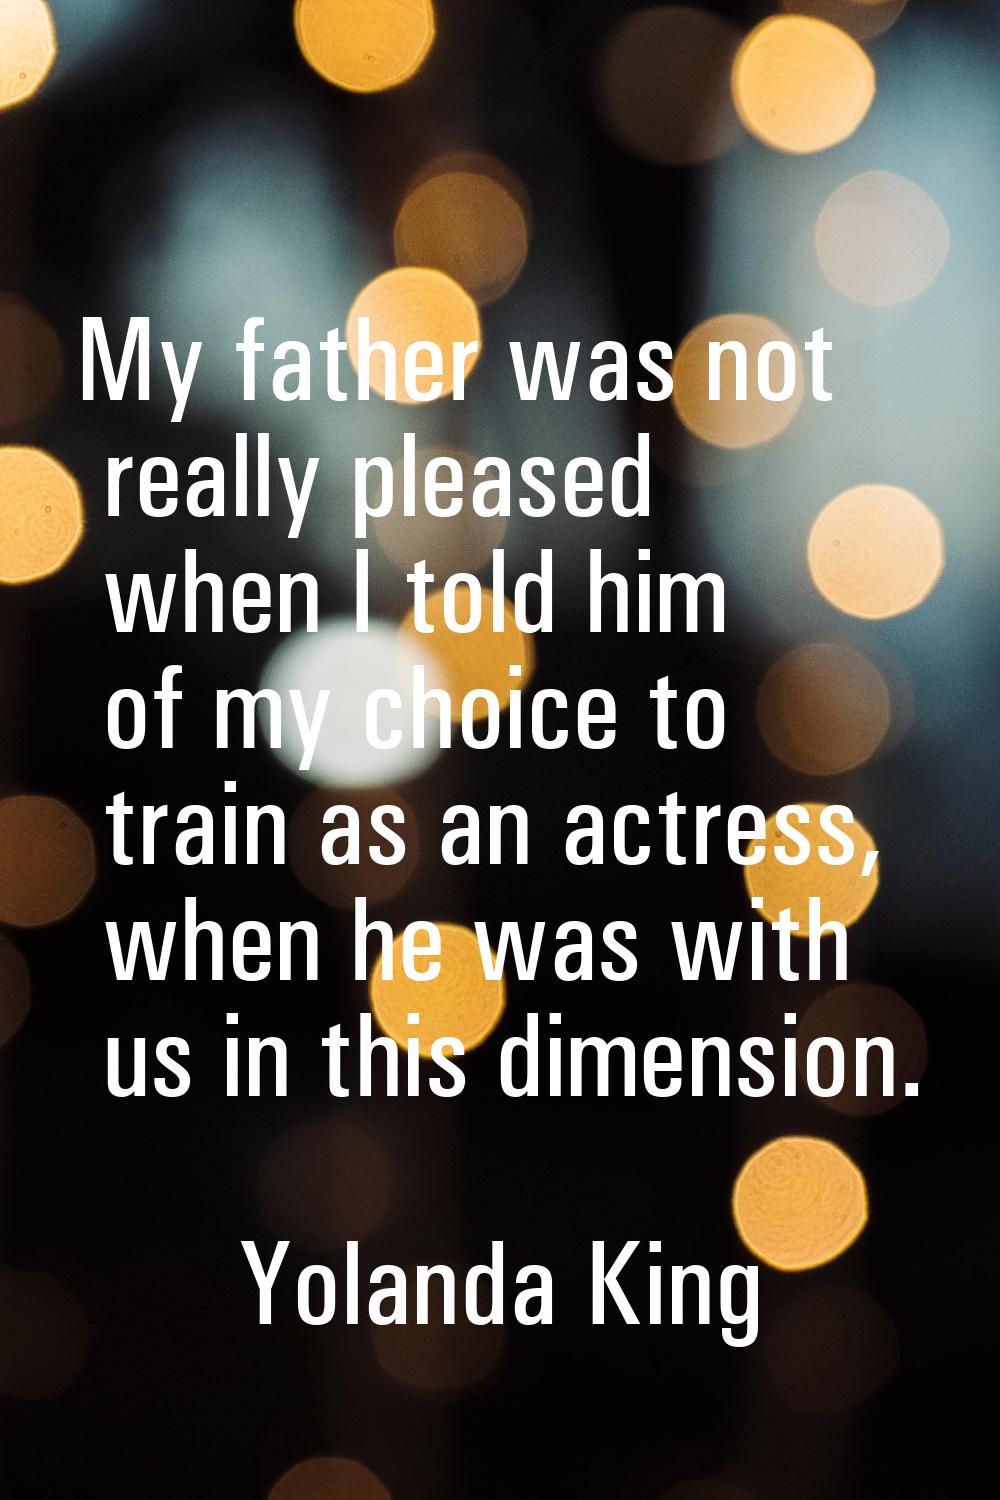 My father was not really pleased when I told him of my choice to train as an actress, when he was w